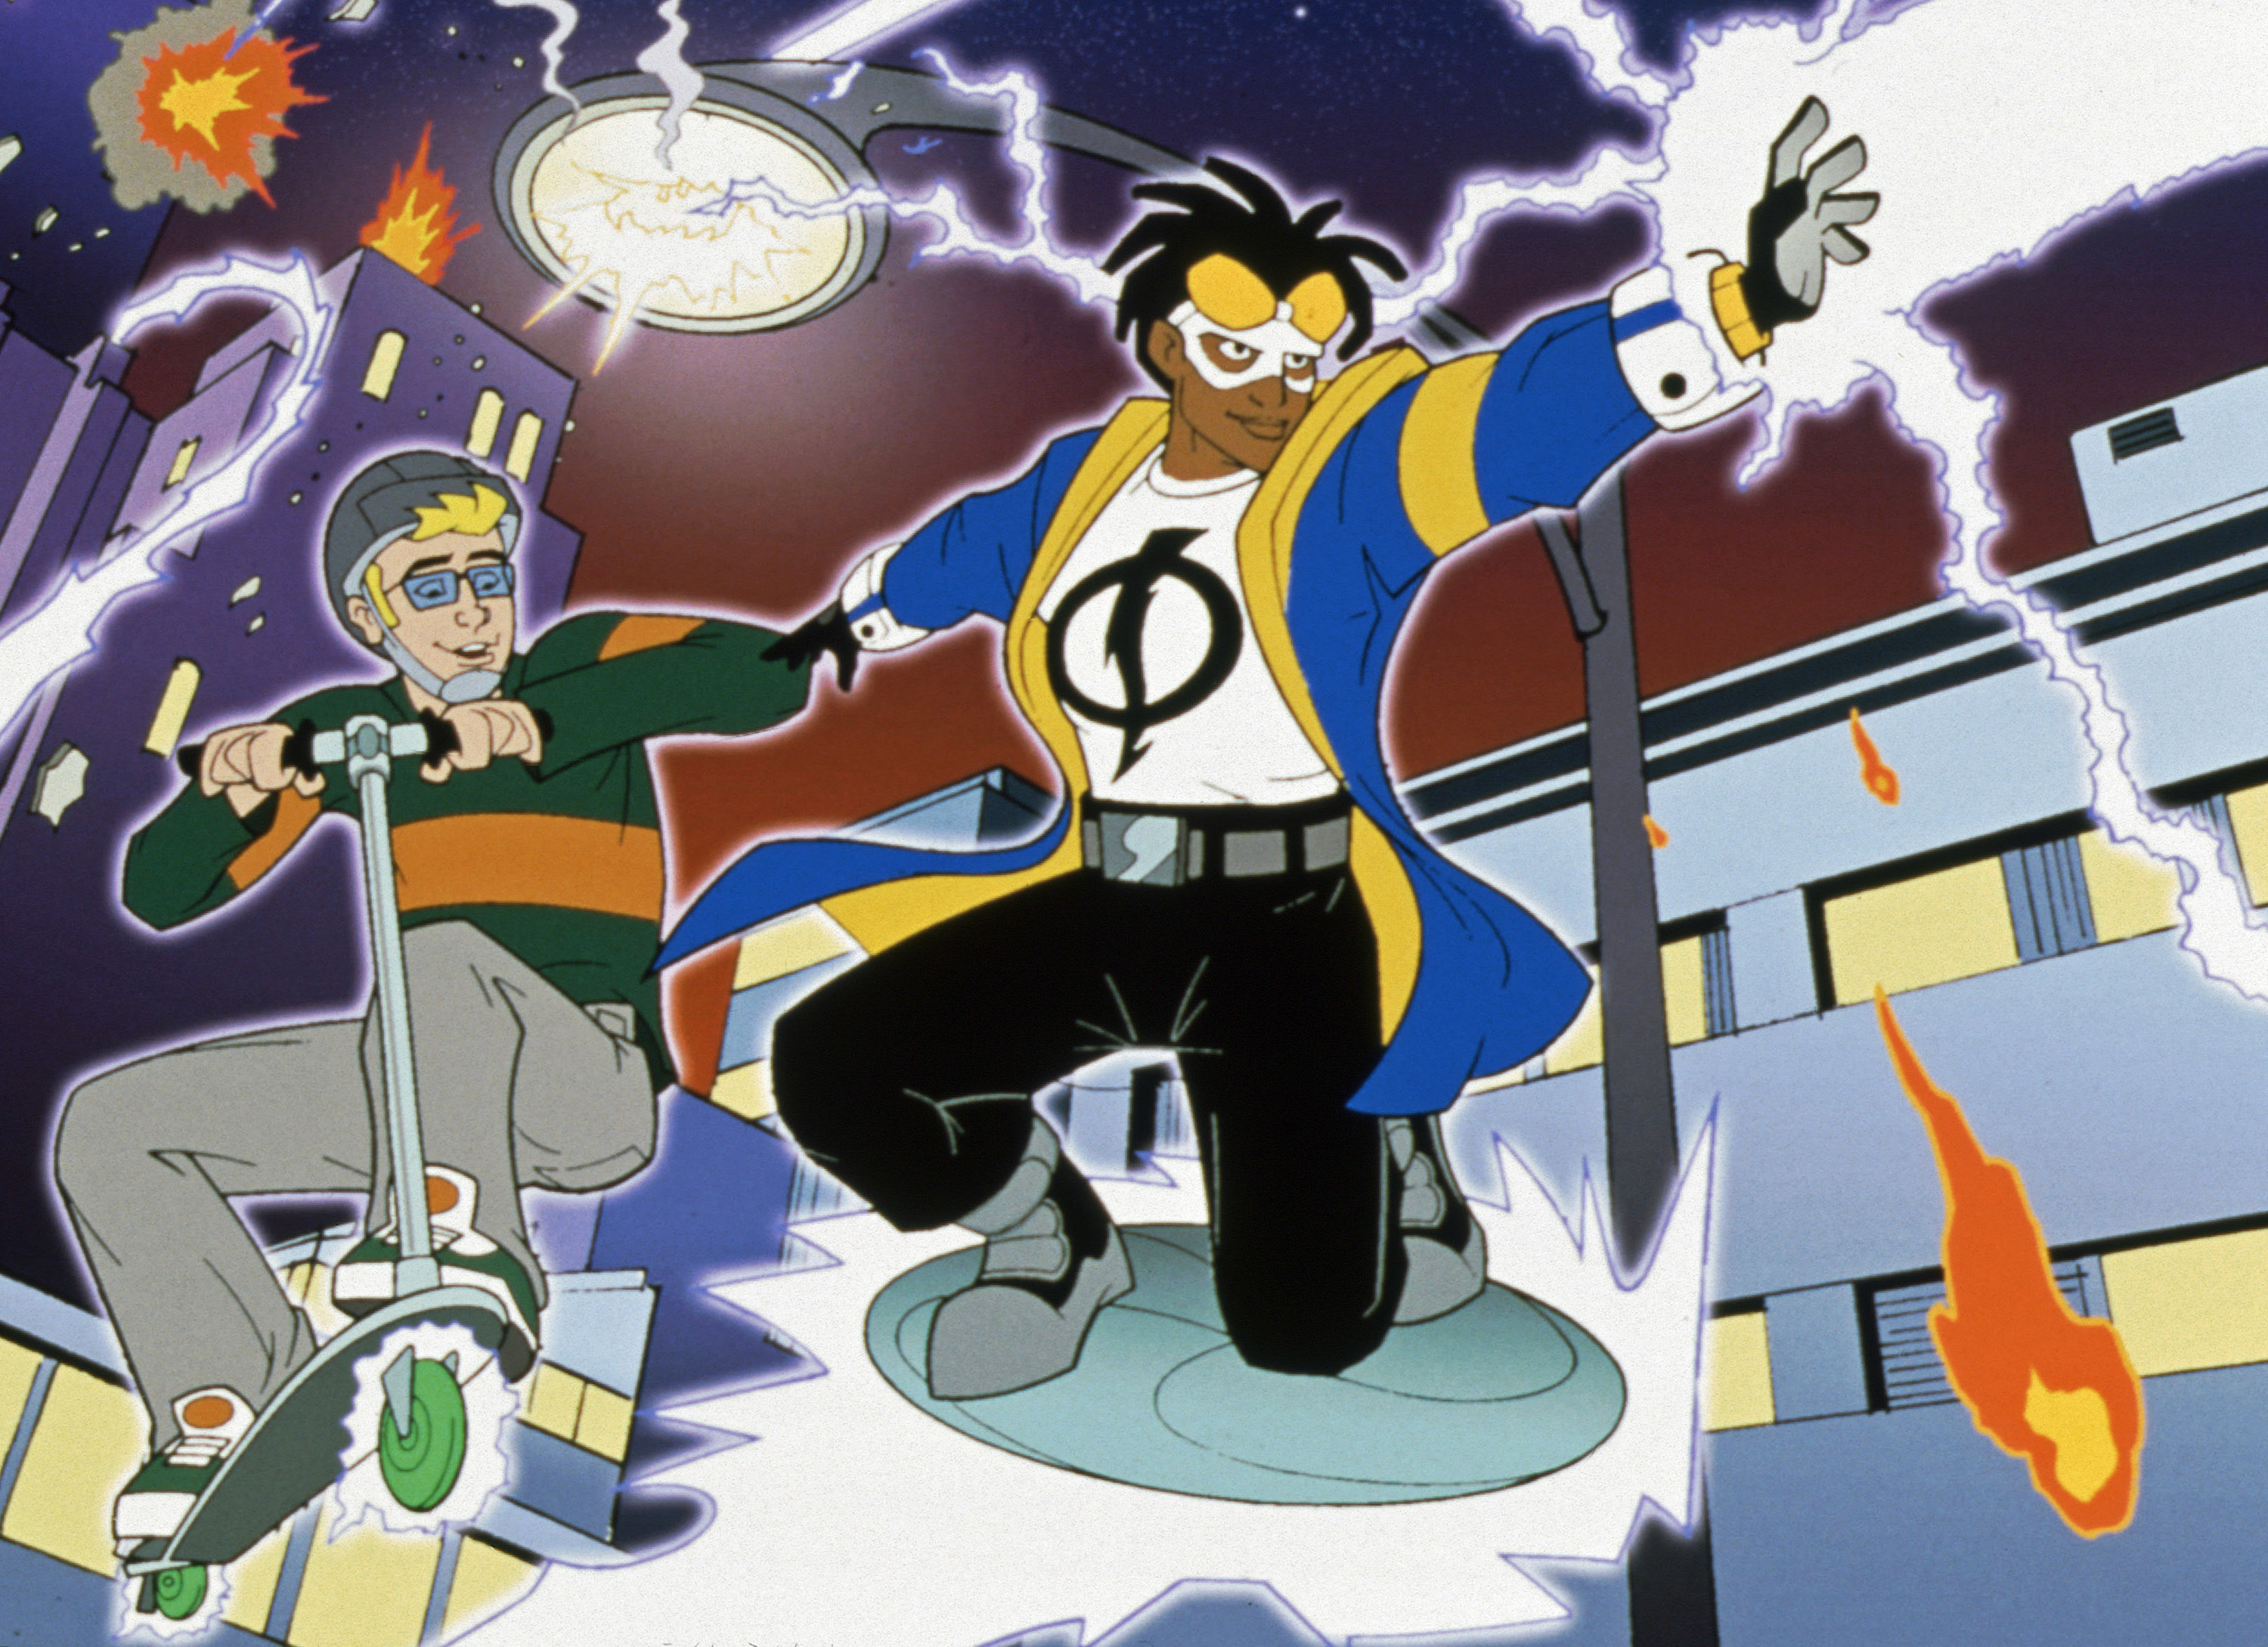 The Static Shock animated series ran from 2000 to 2004 on The WB. 